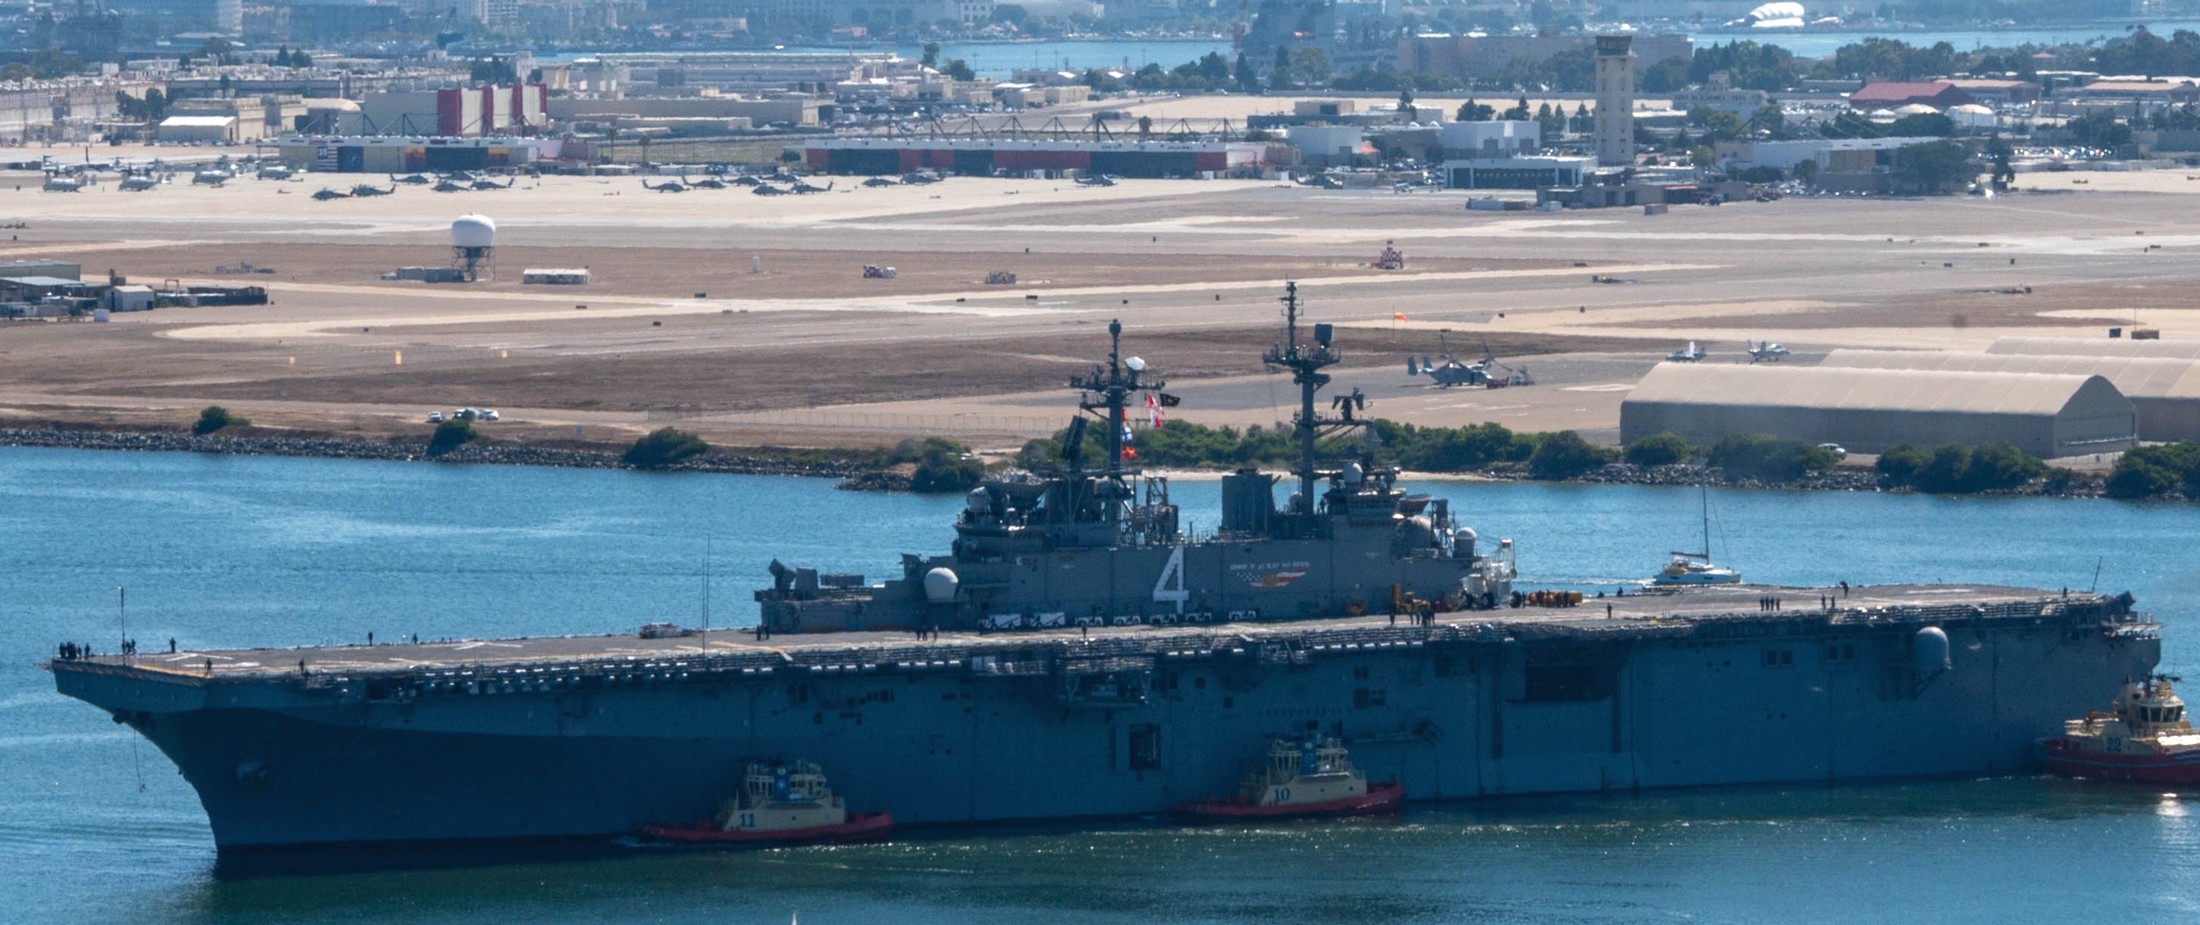 lhd-4 uss boxer wasp class amphibious assault ship landing helicopter dock us navy returning san diego sortie condition alpha 162